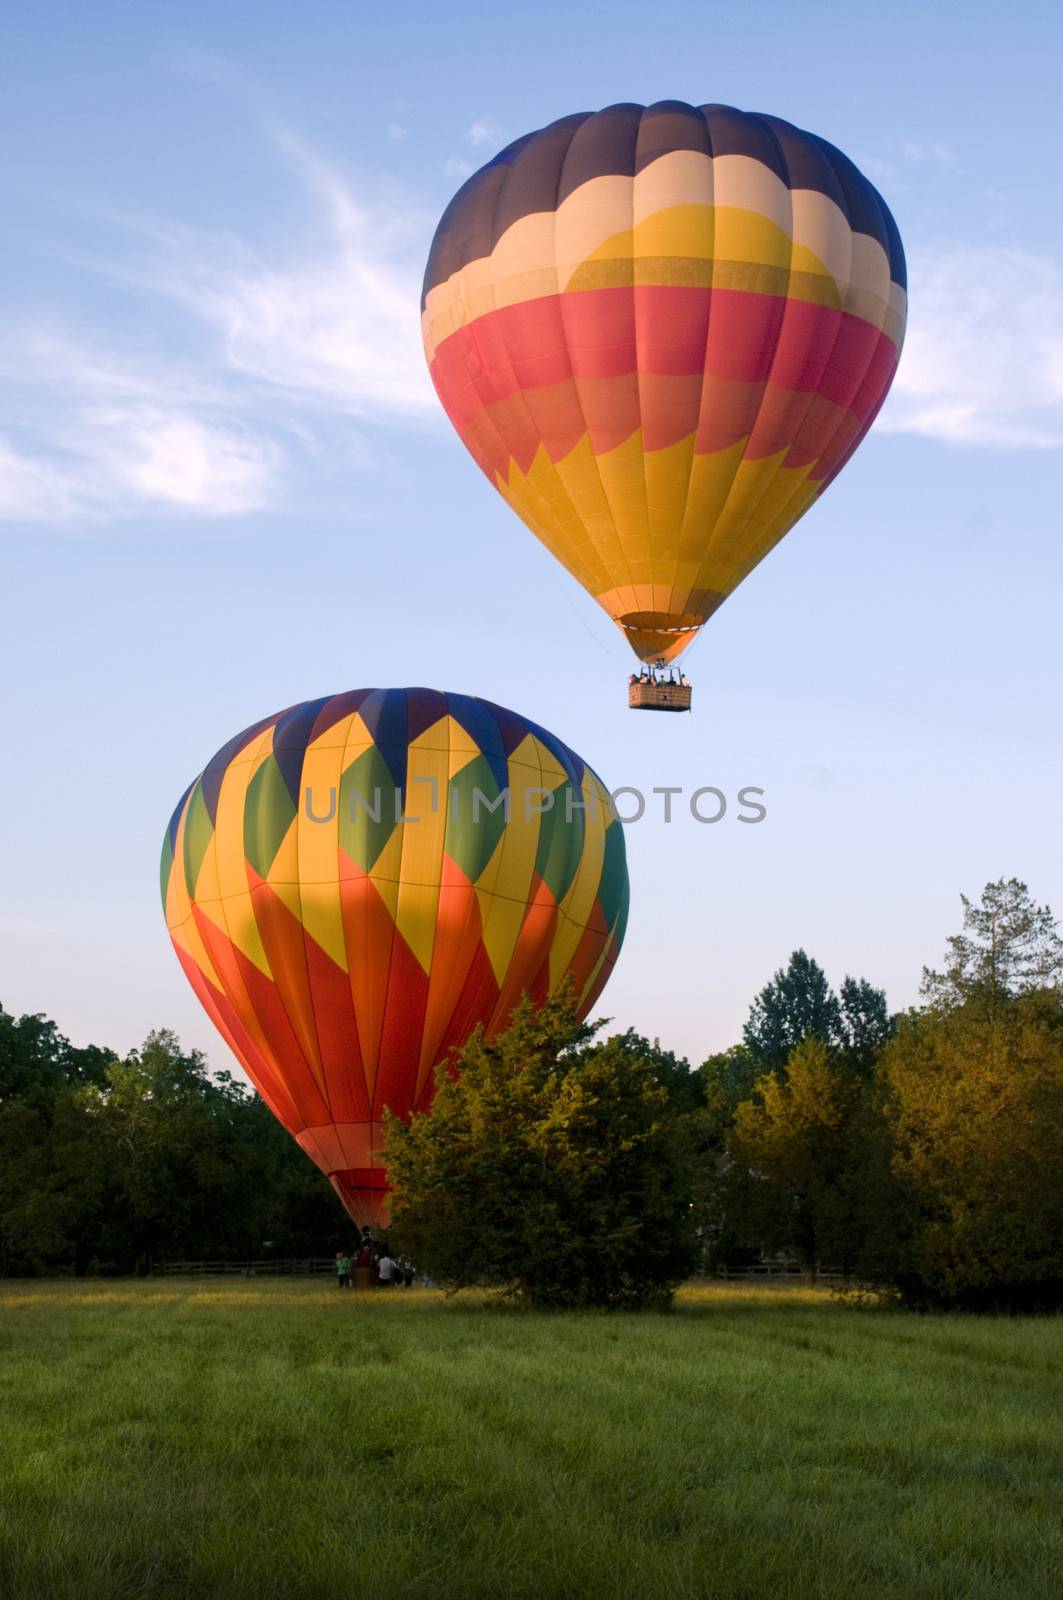 Two hot-air balloons taking off or landing by Balefire9